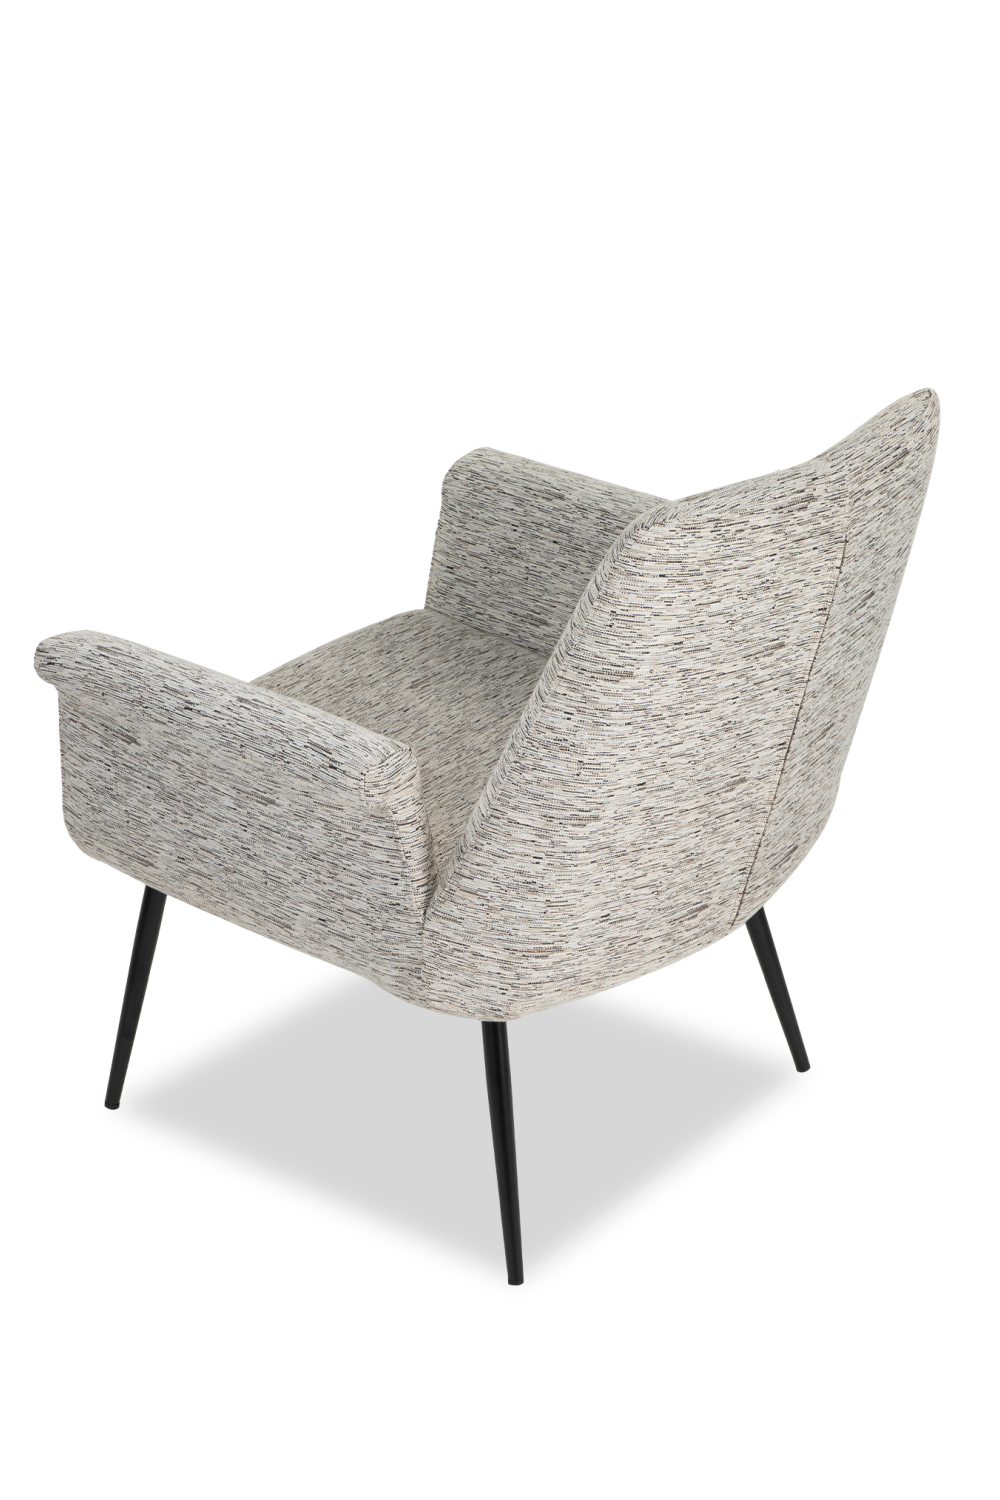 Gray Bouclé Upholstery Occasional Chair | Liang & Eimil Fiore | OROA.com